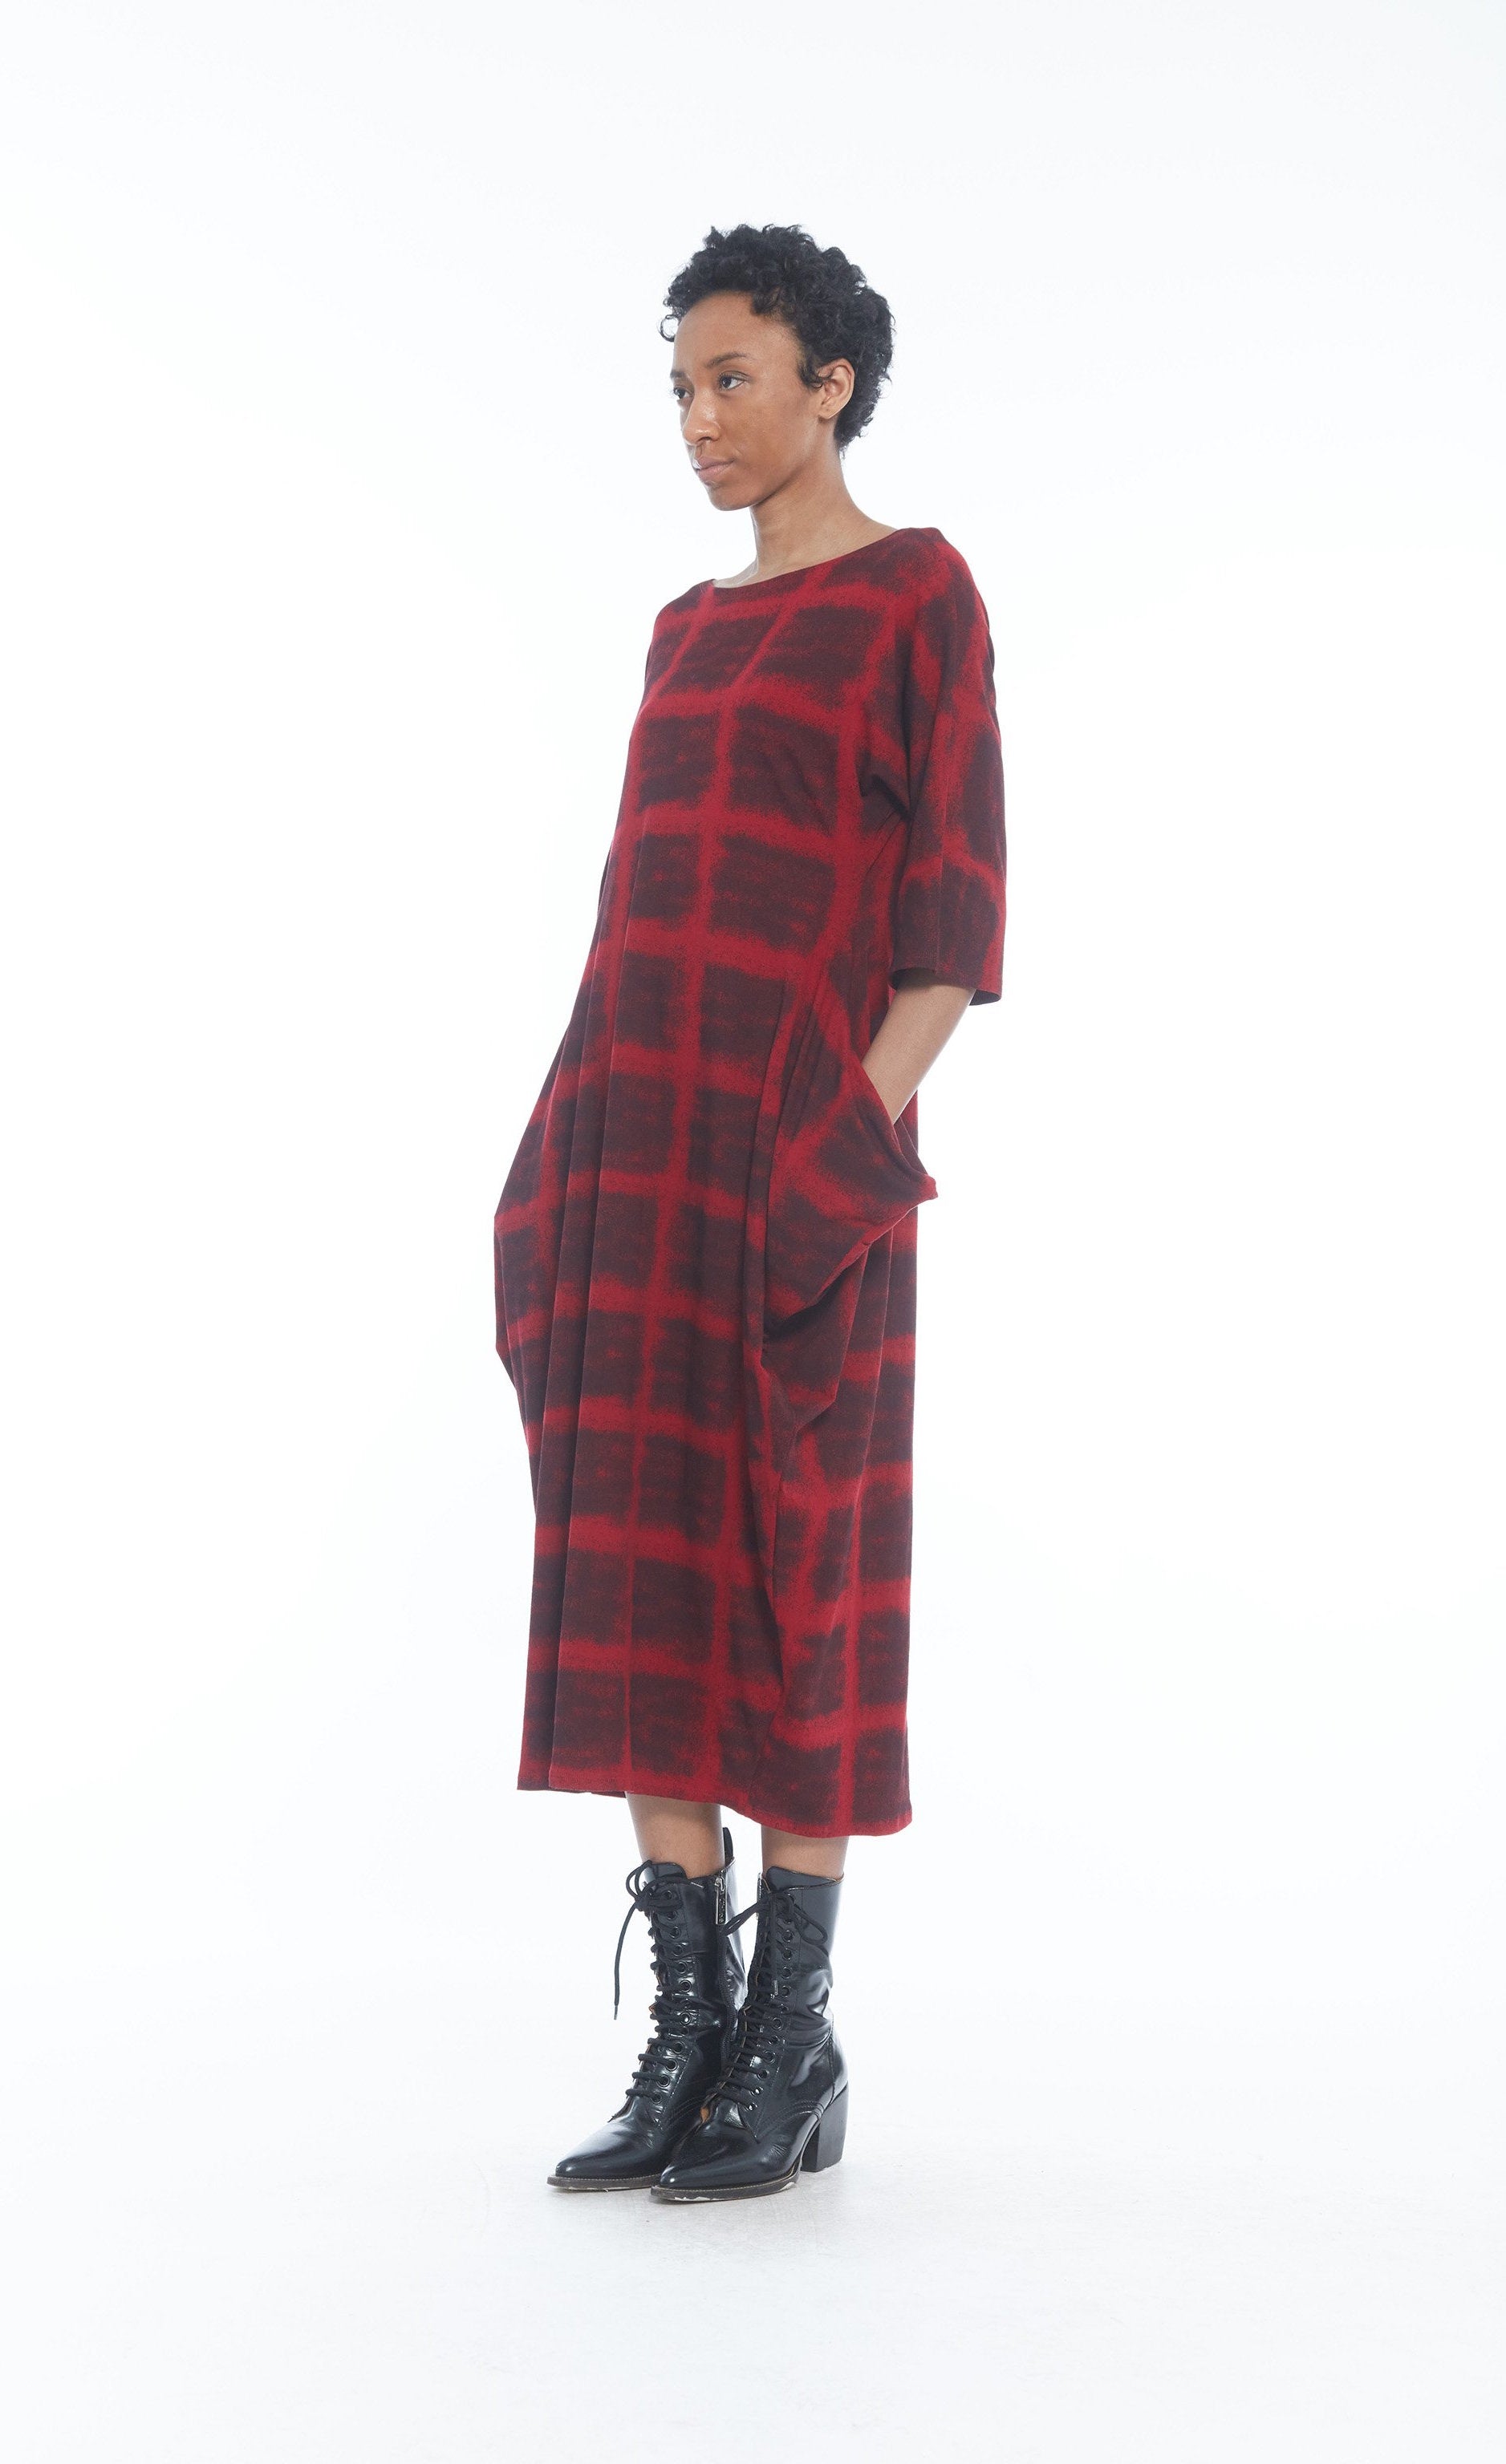 Front full body view of a woman wearing the mxmatthildur mavis dress in a red and black plaid print. This dress has 3/4 length sleeves, large pockets, and sits below the knees.